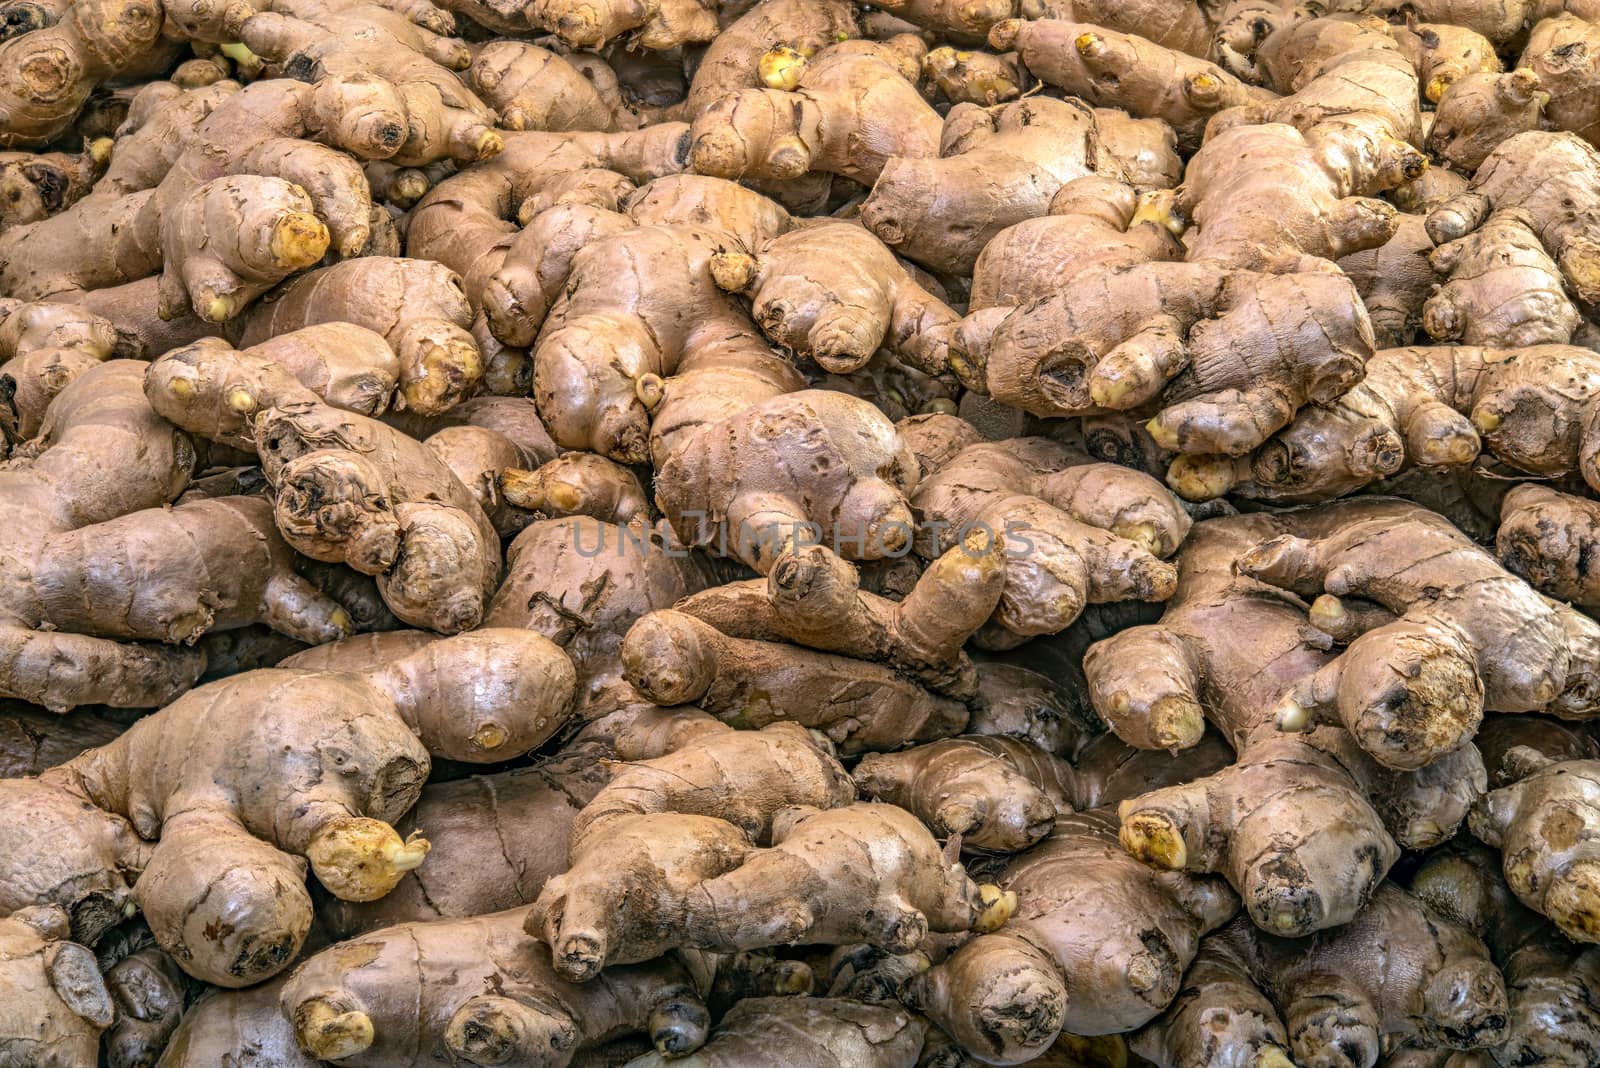 Full basket of ginger is on display for sale in the fresh vegetable market